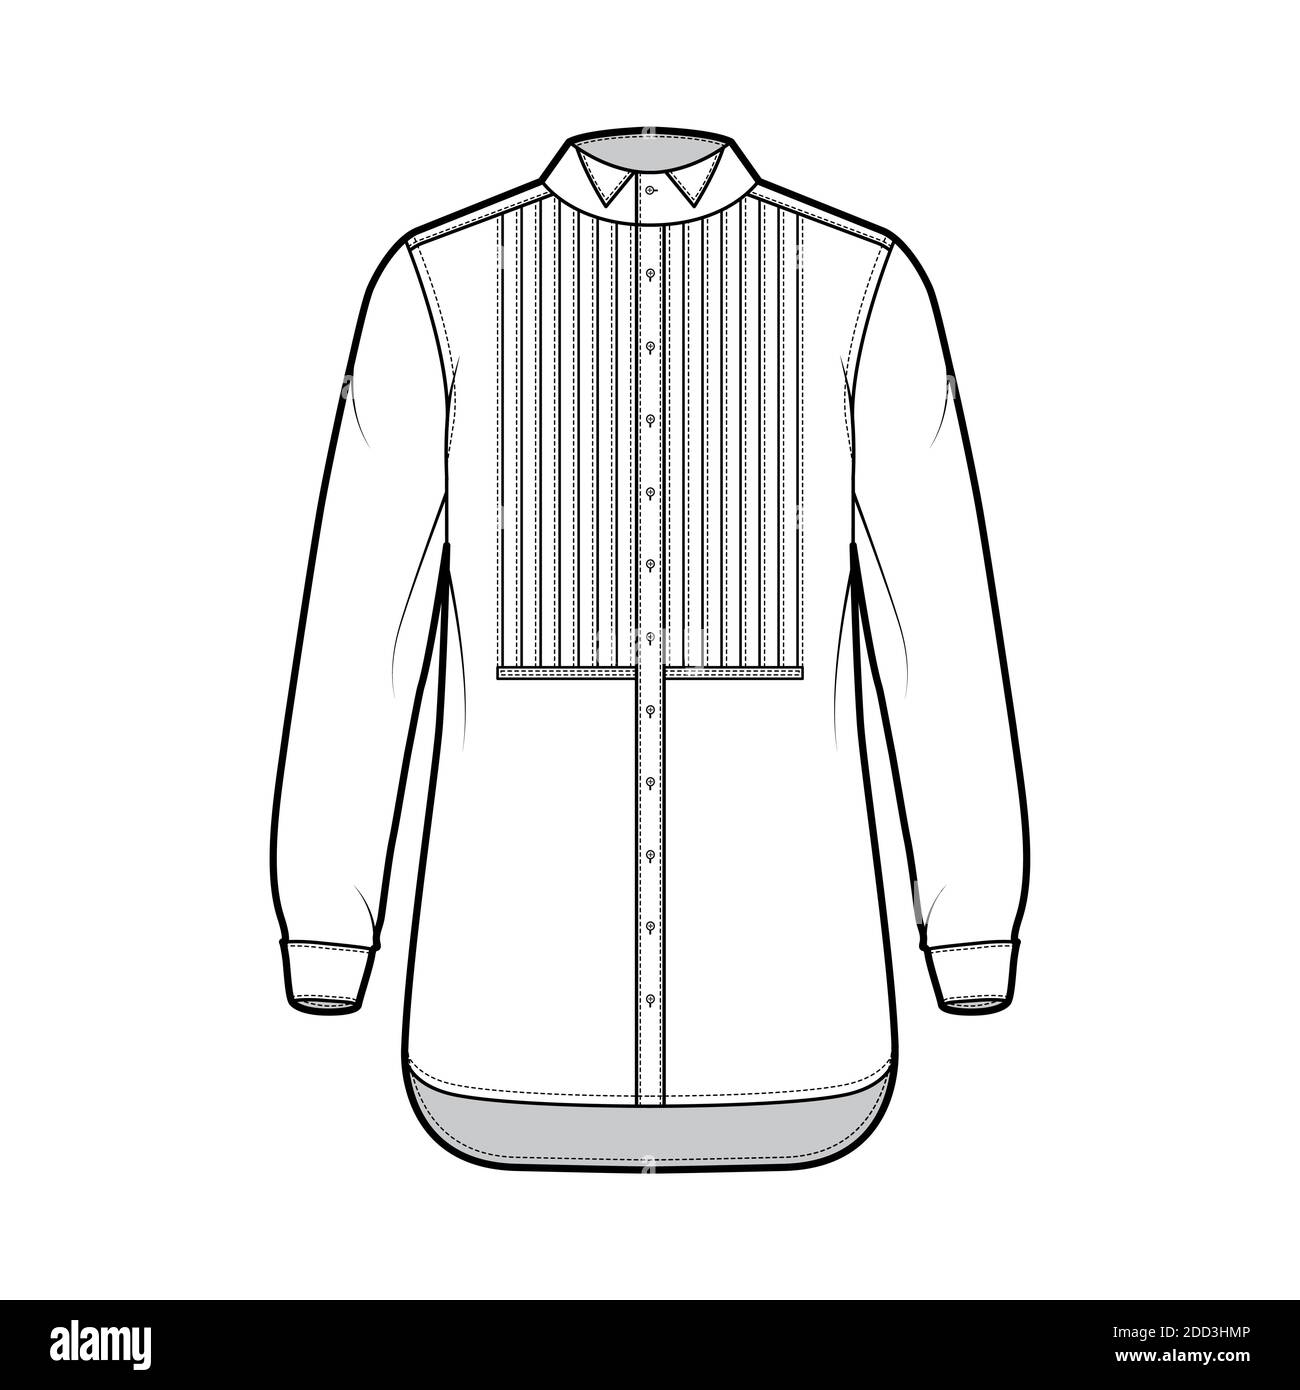 Shirt tuxedo dress technical fashion illustration with pleated pintucked bib, long sleeves with french cuff, wing collar, relax fit. Flat template front white color. Women men unisex top CAD mockup Stock Vector